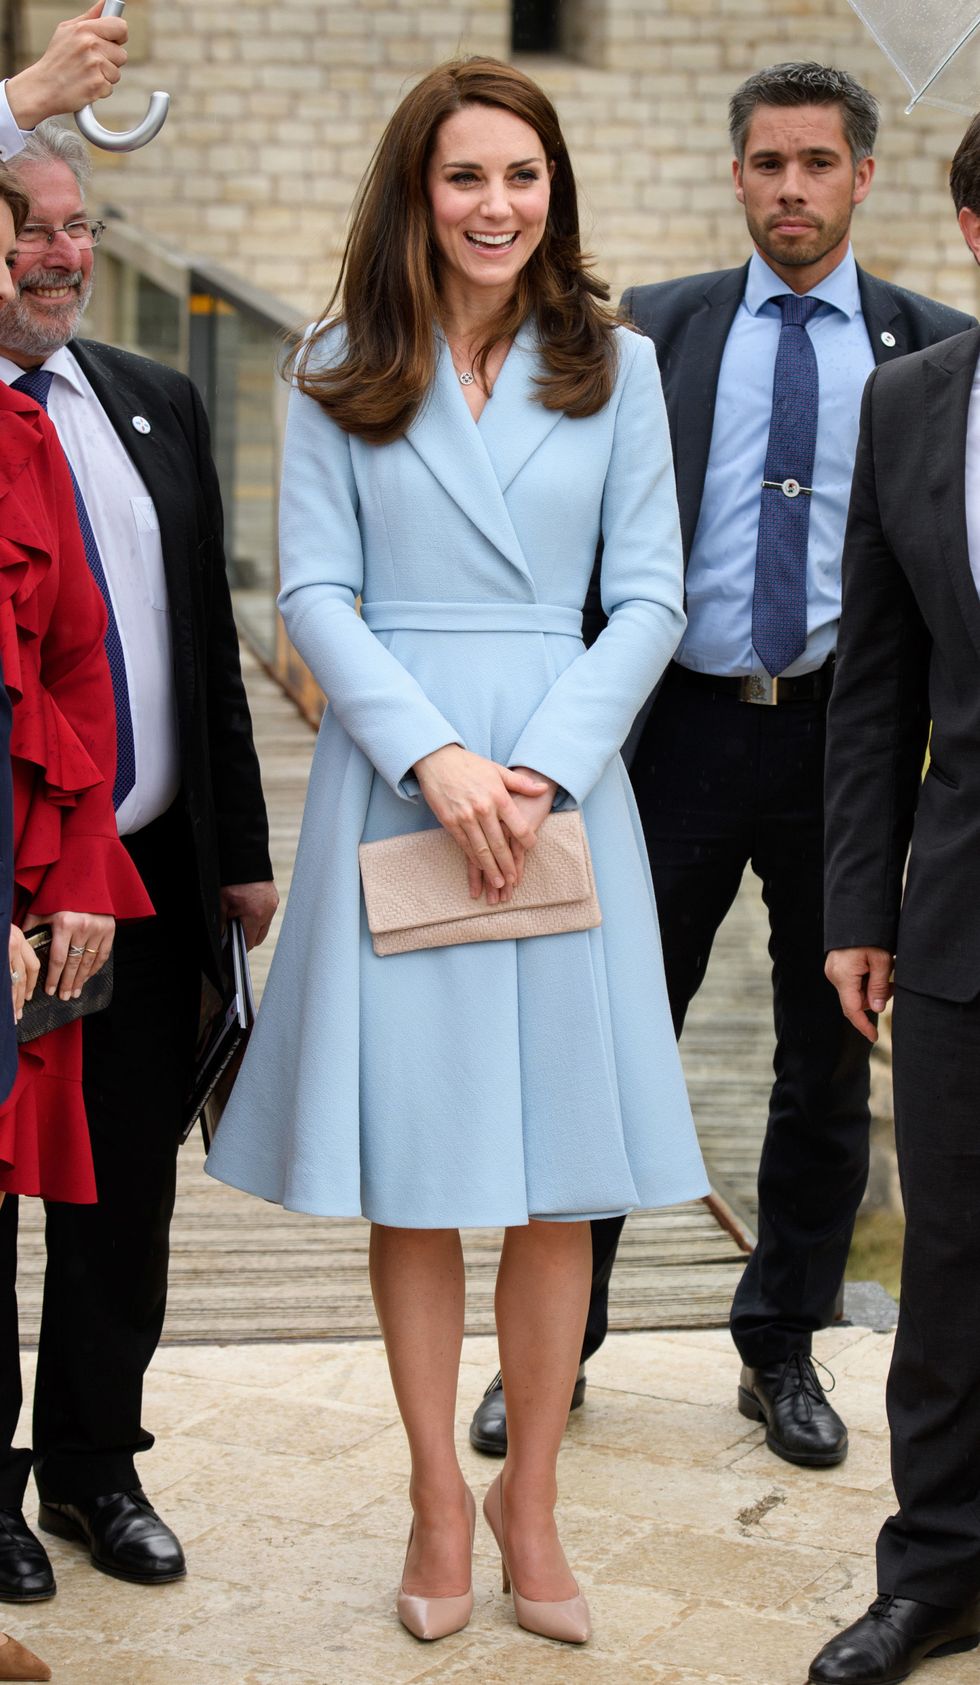 LUXEMBOURG - MAY 11:  Catherine, Duchess of Cambridge  visits the  Drai Eechelen Museum during a one day visit on May 11, 2017 in Luxembourg. The Duchess will attend a series of engagements to celebrate the cultural and historic ties between the UK and Luxembourg and the official commemoration of the 1867 Treaty of London, which confirmed Luxembourg's independence and neutrality.  (Photo by Tim Rooke - Pool/Getty Images)